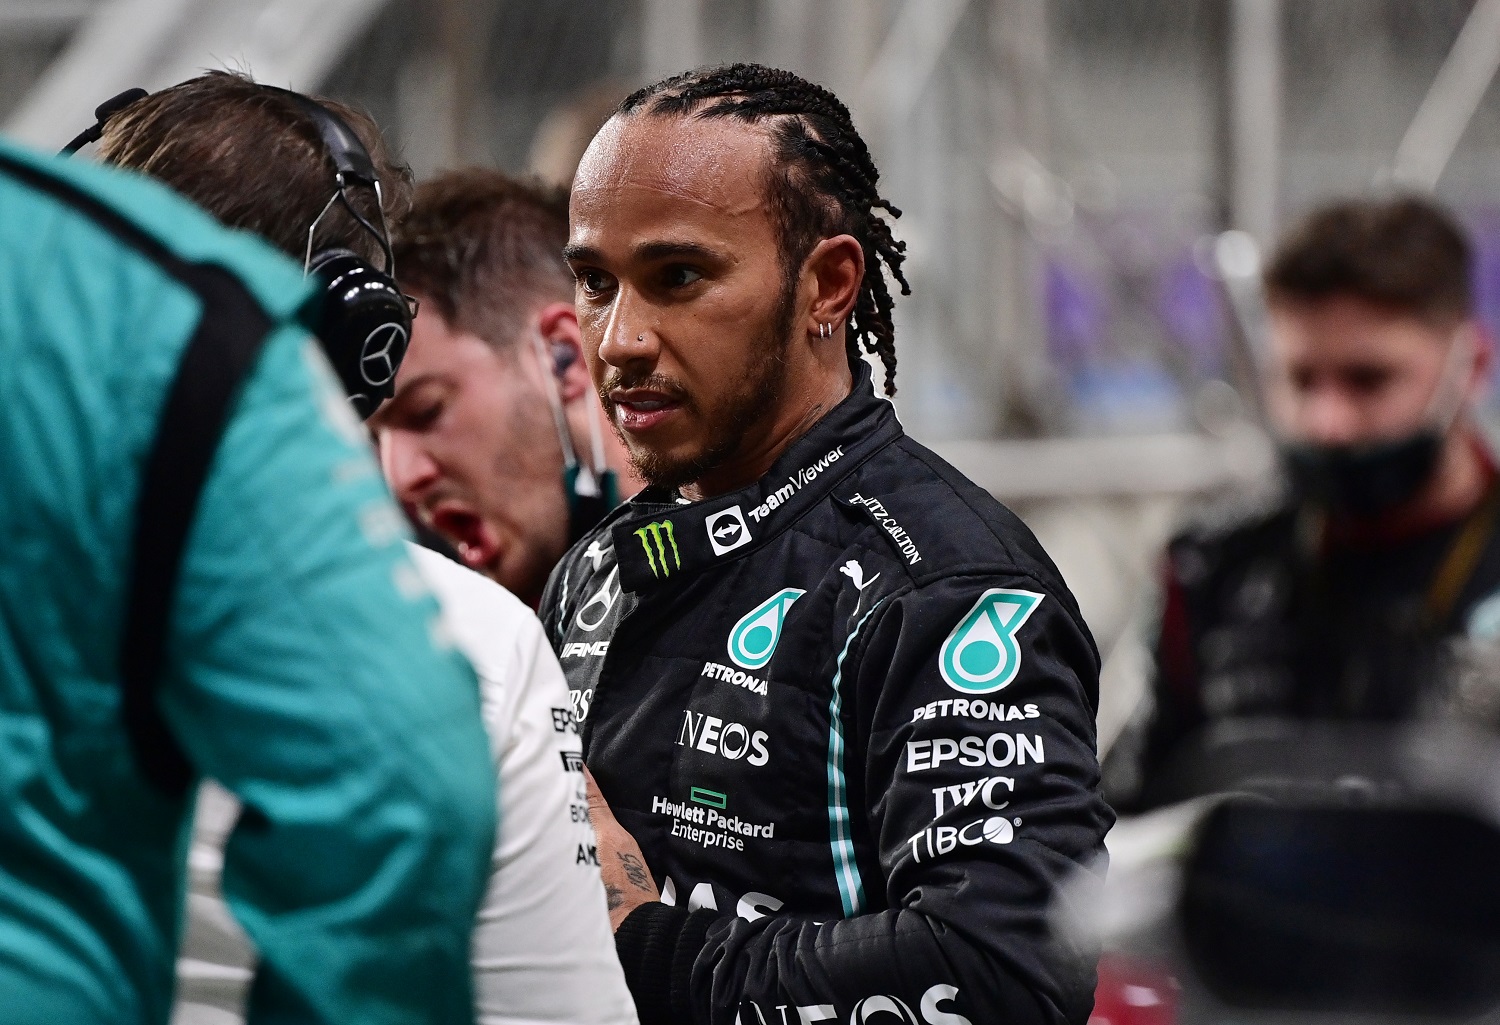 Lewis Hamilton looks on from the pits at the Formula 1 Grand Prix of Saudi Arabia on Dec. 5, 2021.